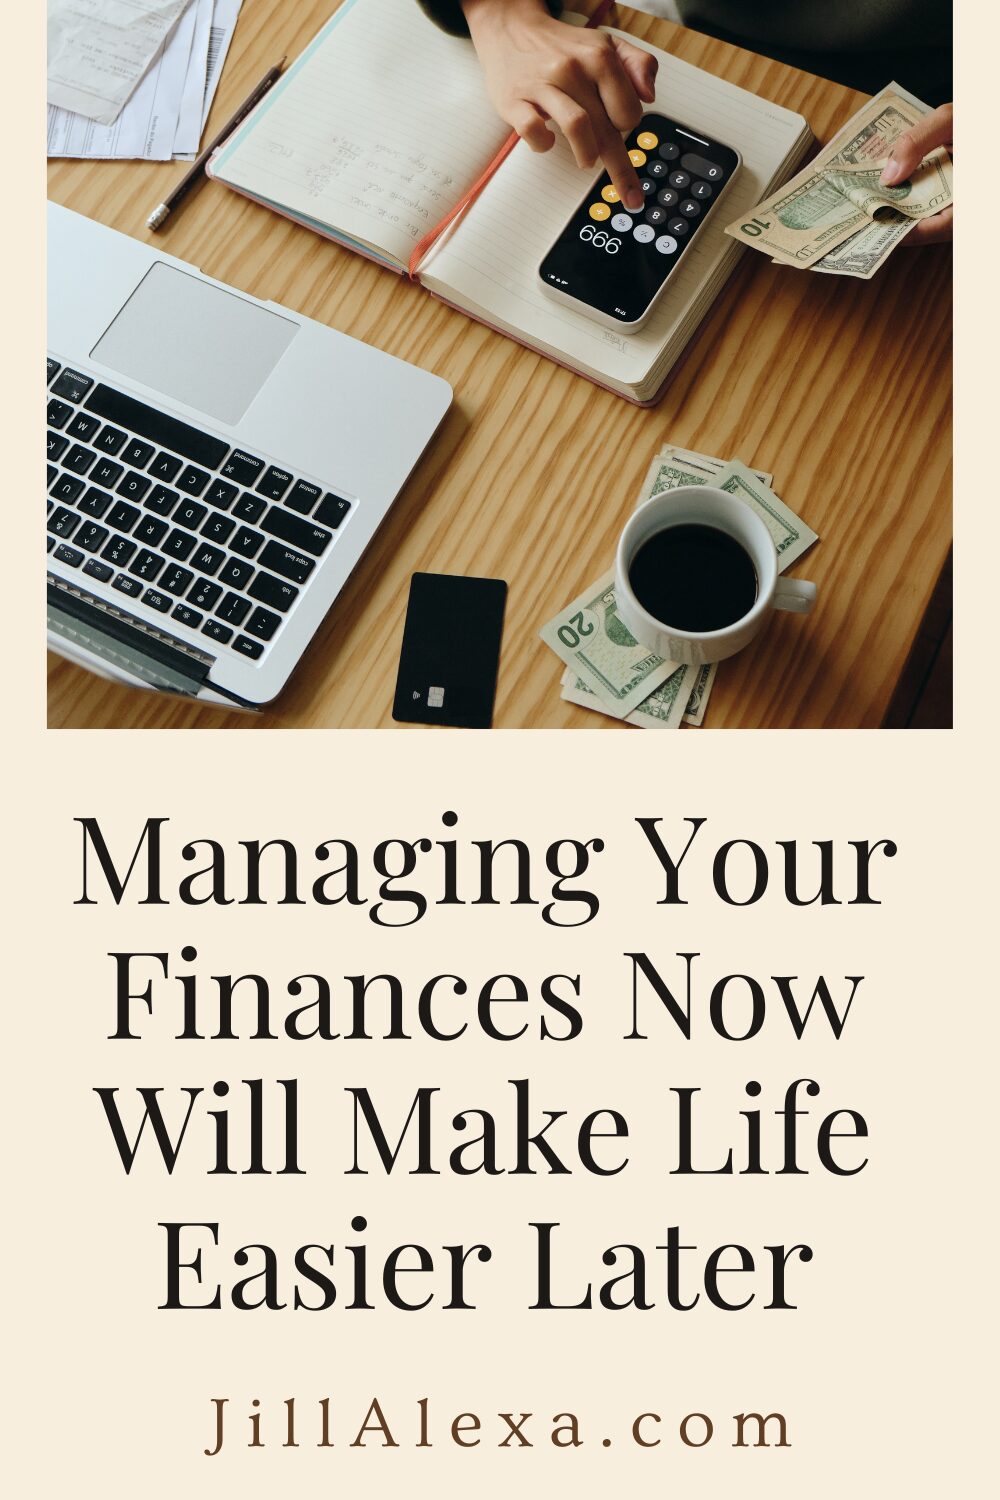 Managing your finances now will make life way easier down the line.  Here are 3 smart reasons to start managing your finances earlier rather than later.  #managingyourfinancesnow